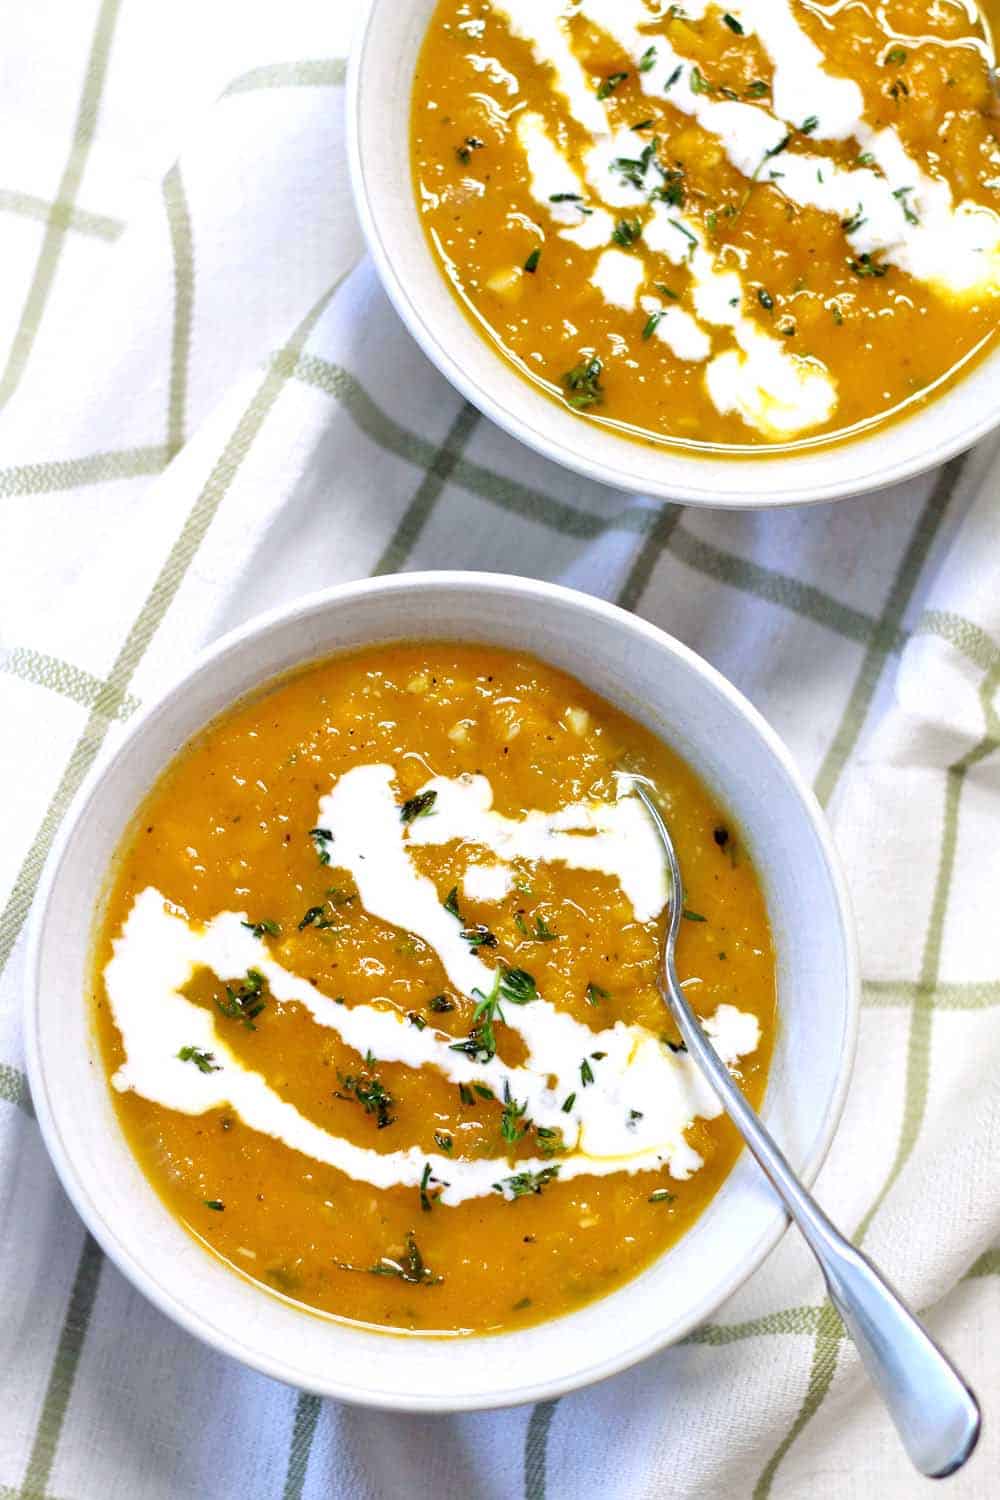 This healthy and delicious butternut squash and thyme soup could not be easier to make! It's like fall in a bowl.